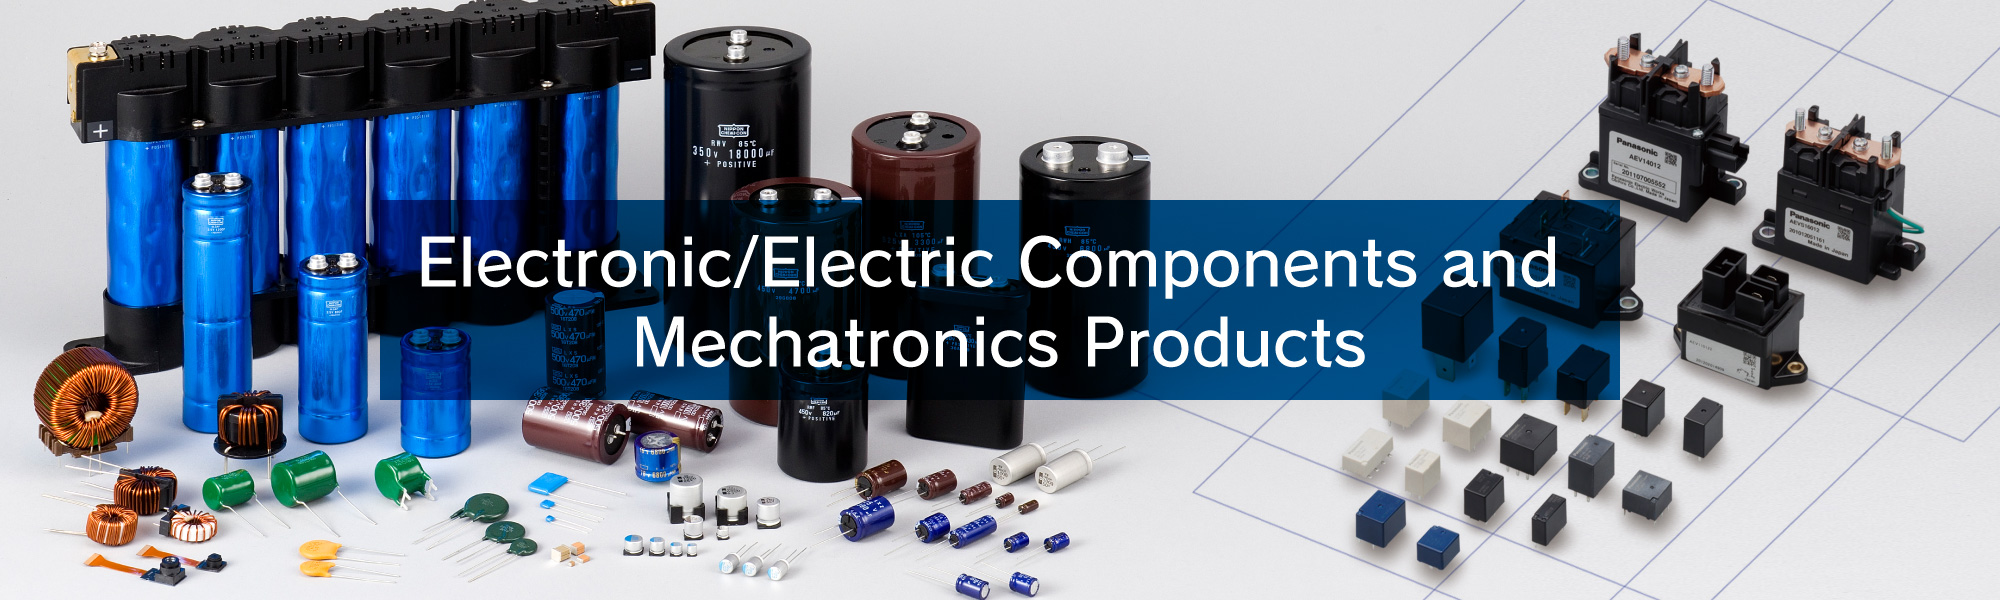 Electronic/Electric Components and Mechatronics Products